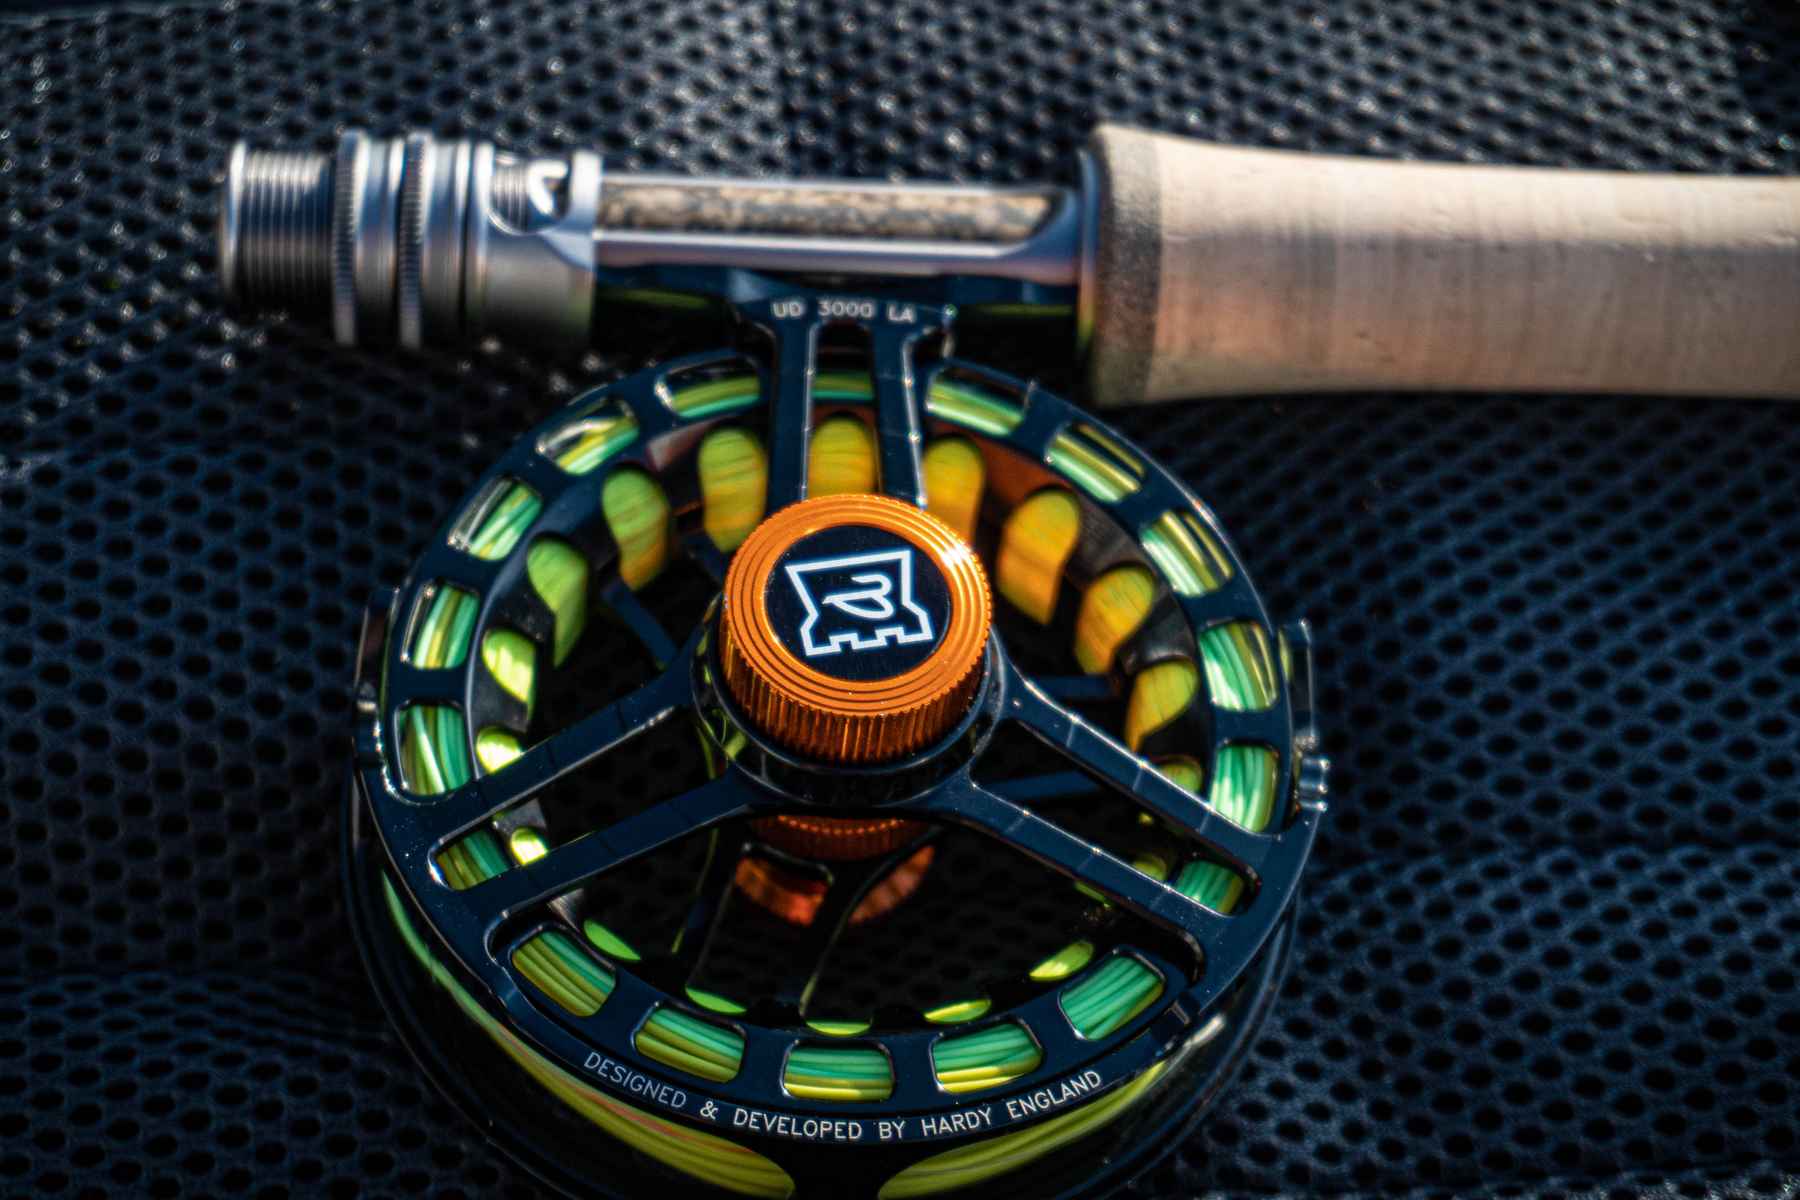 redington reel reviews Archives 1 - Trident Fly Fishing